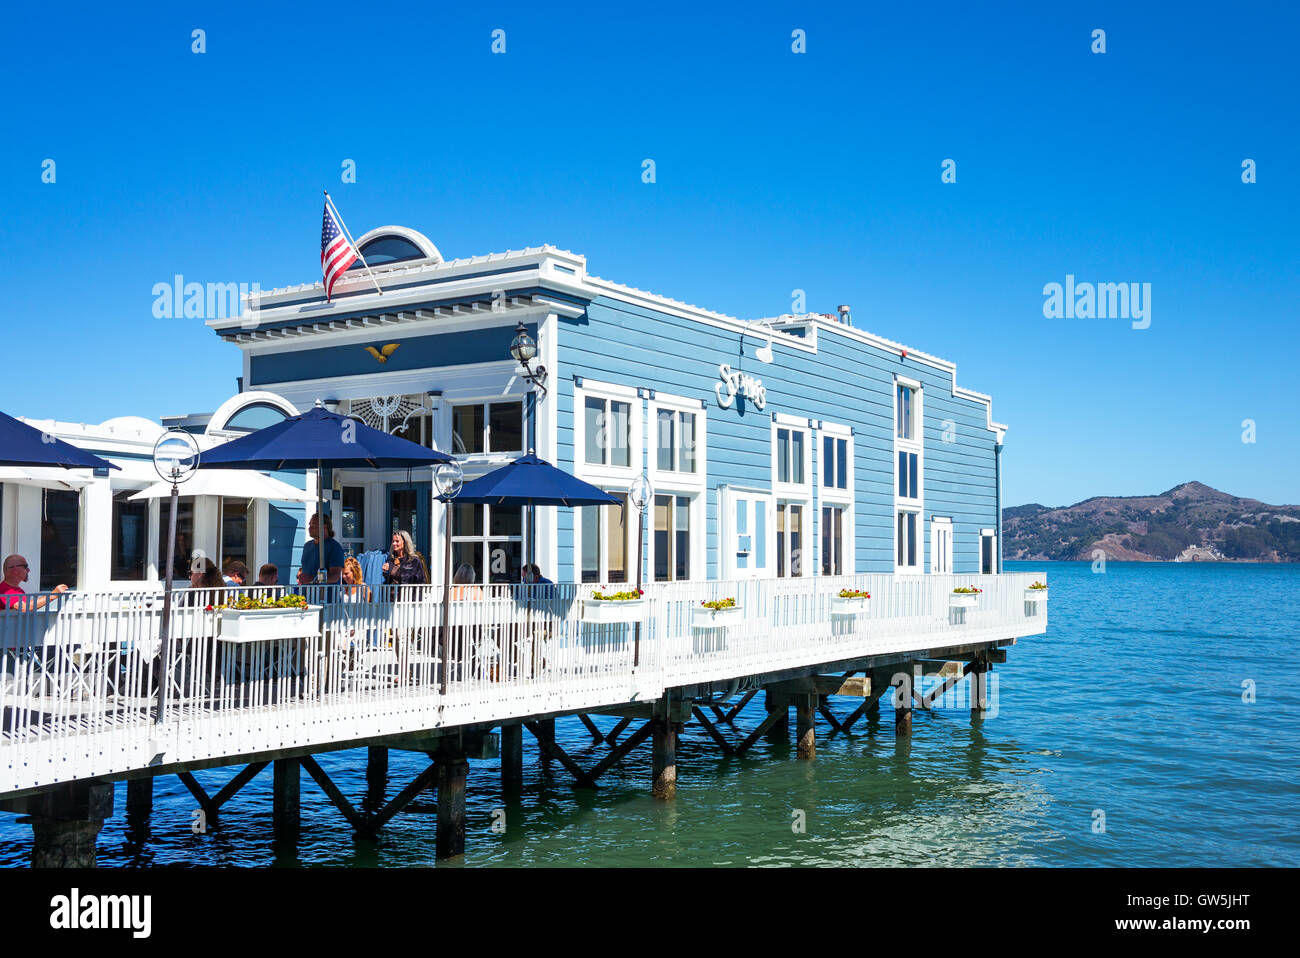 https://c8.alamy.com/comp/GW5JHT/sausalito-usa-september-23-2015-a-restaurant-on-stilts-in-the-waterfront-GW5JHT.jpg